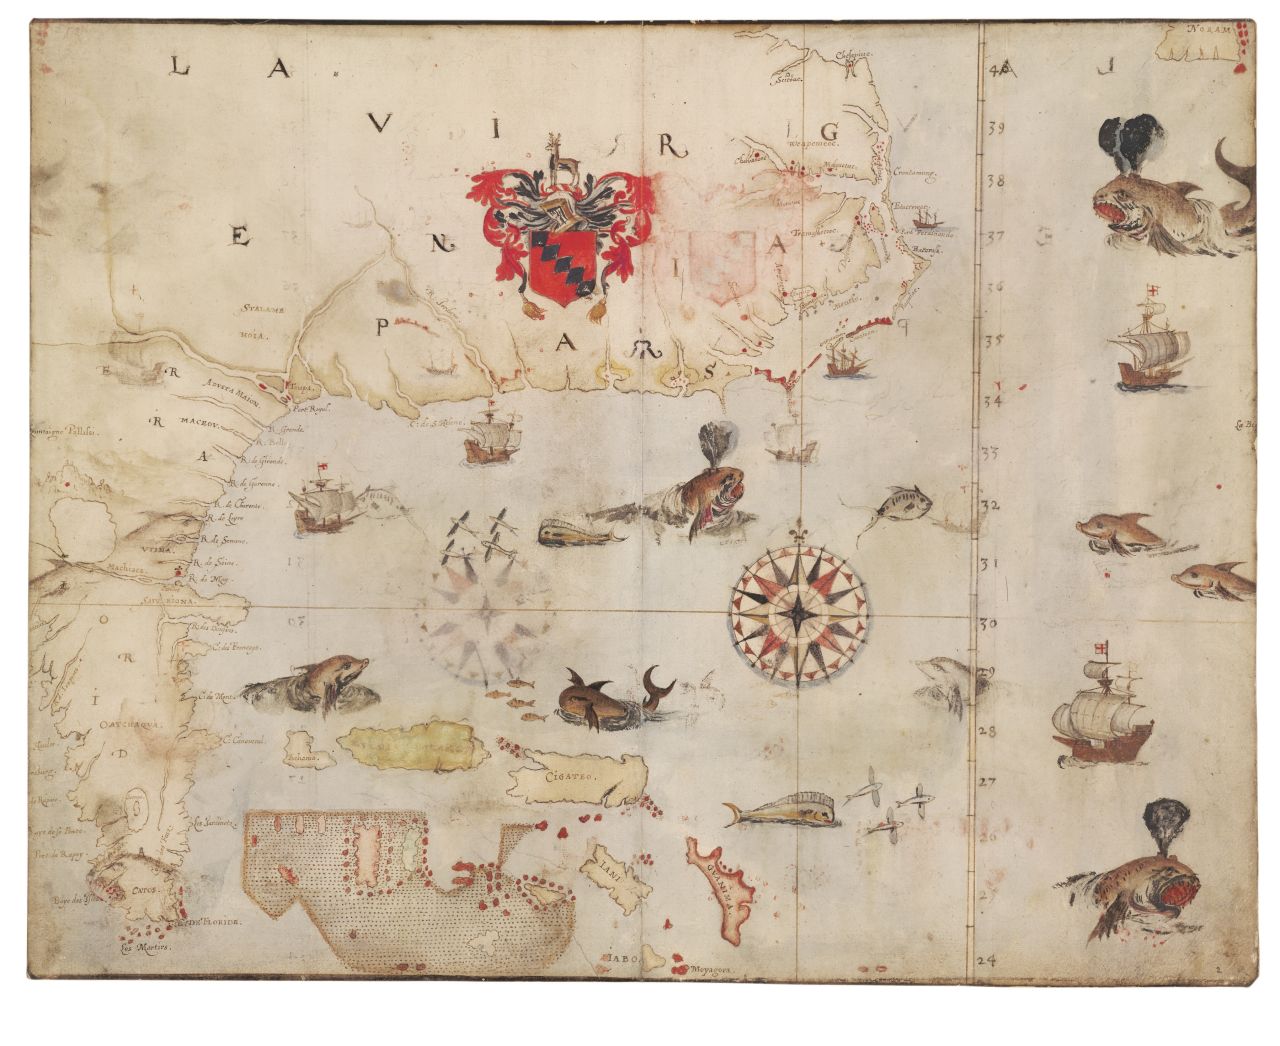 An 1500s map of the North America's east coast, including major coastal features and various aquatic species, by John White. 